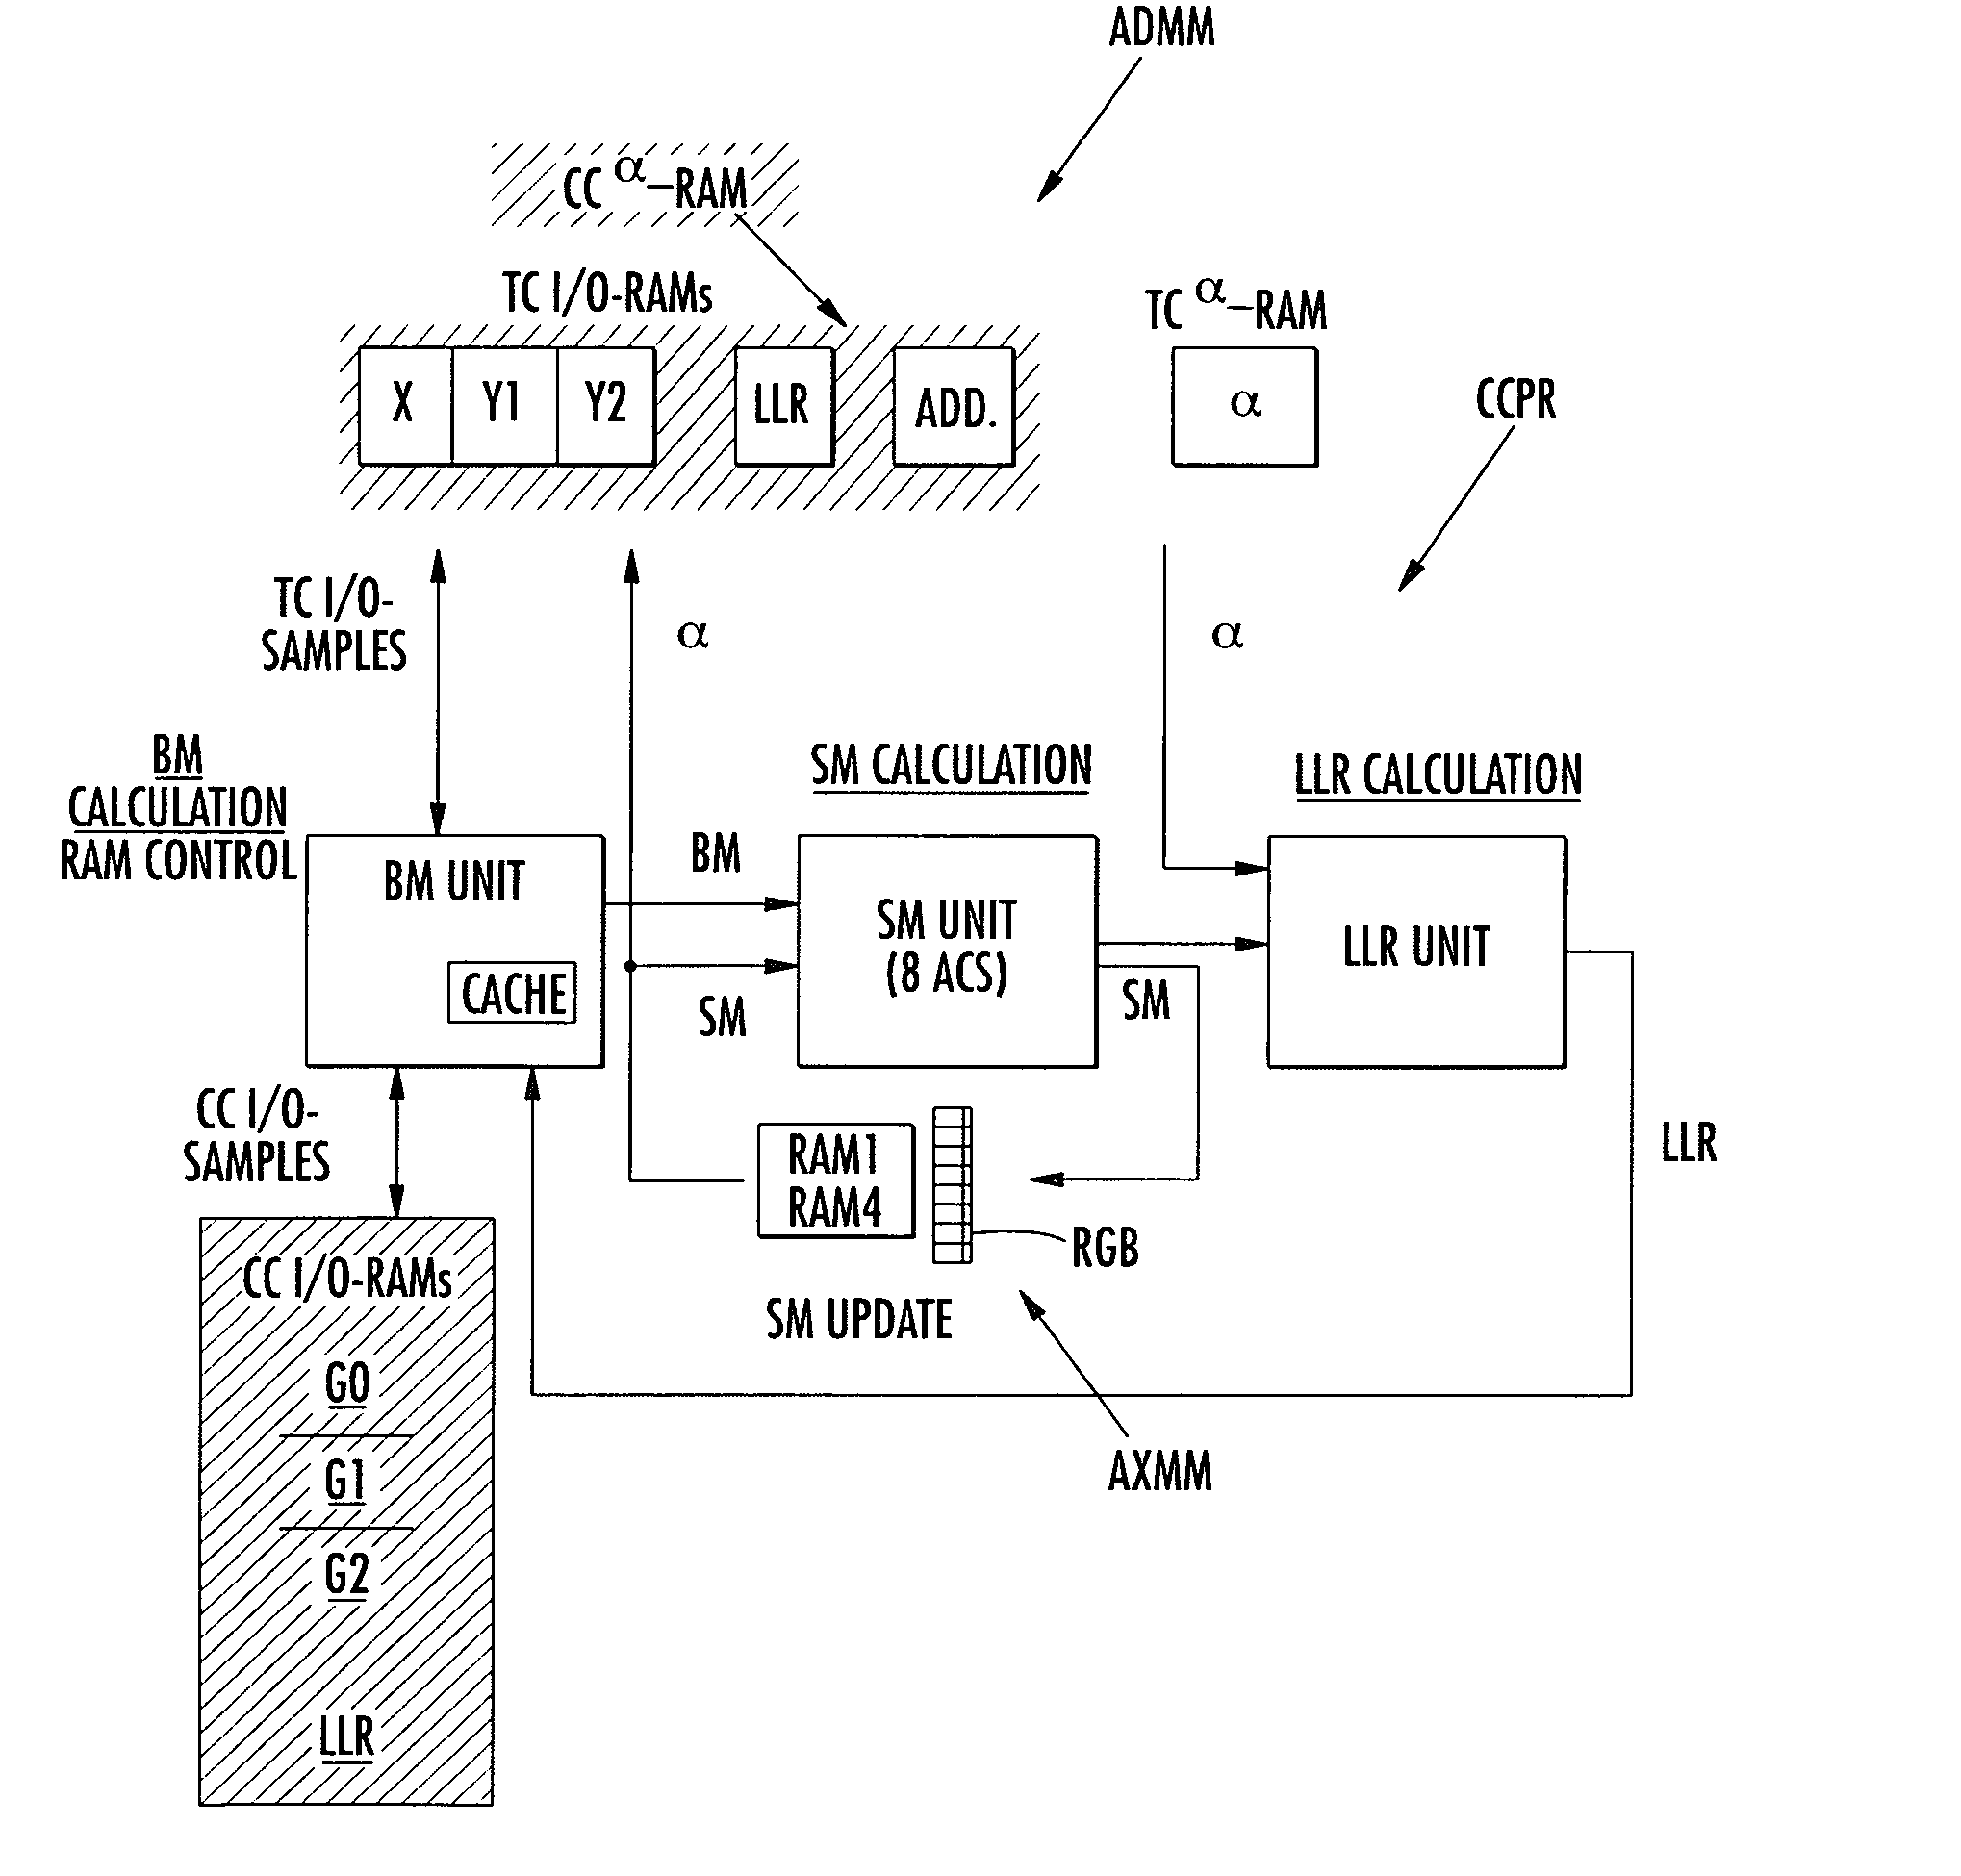 Combined turbo-code/convolutional code decoder, in particular for mobile radio systems